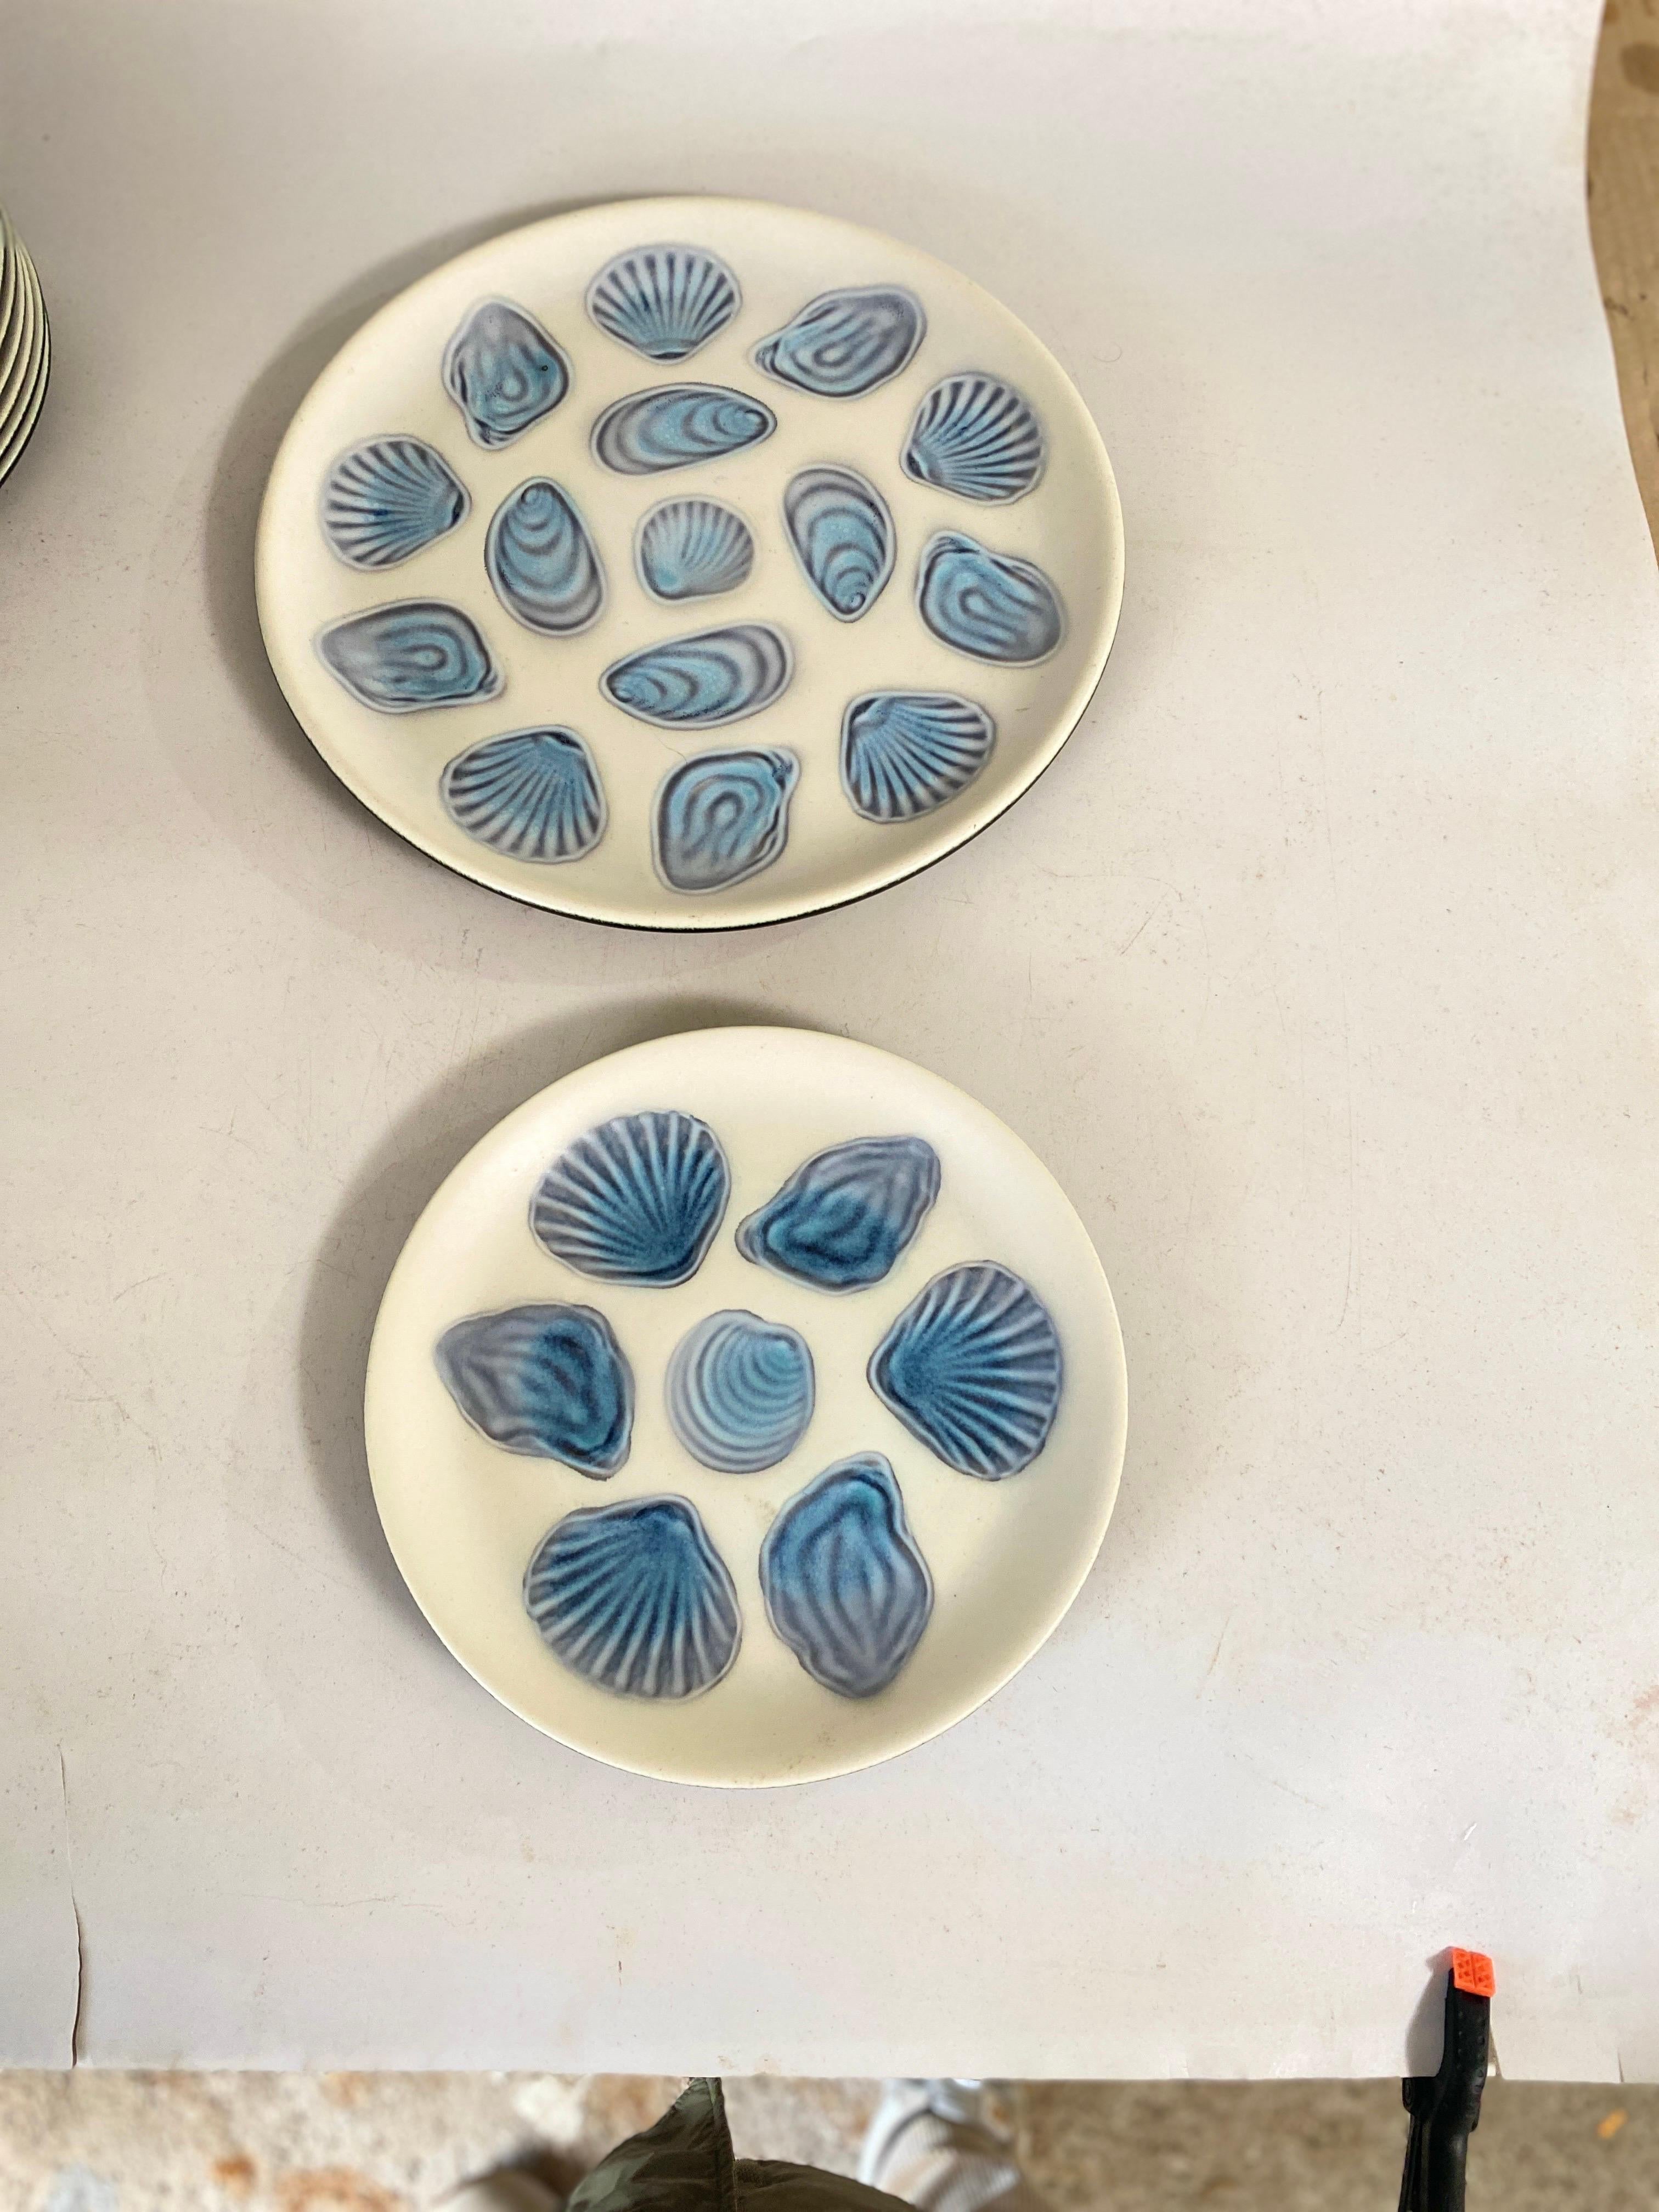 2 Large Oyster Plates and 6 Plates in Ceramic Blue and White France by Elchinger For Sale 1